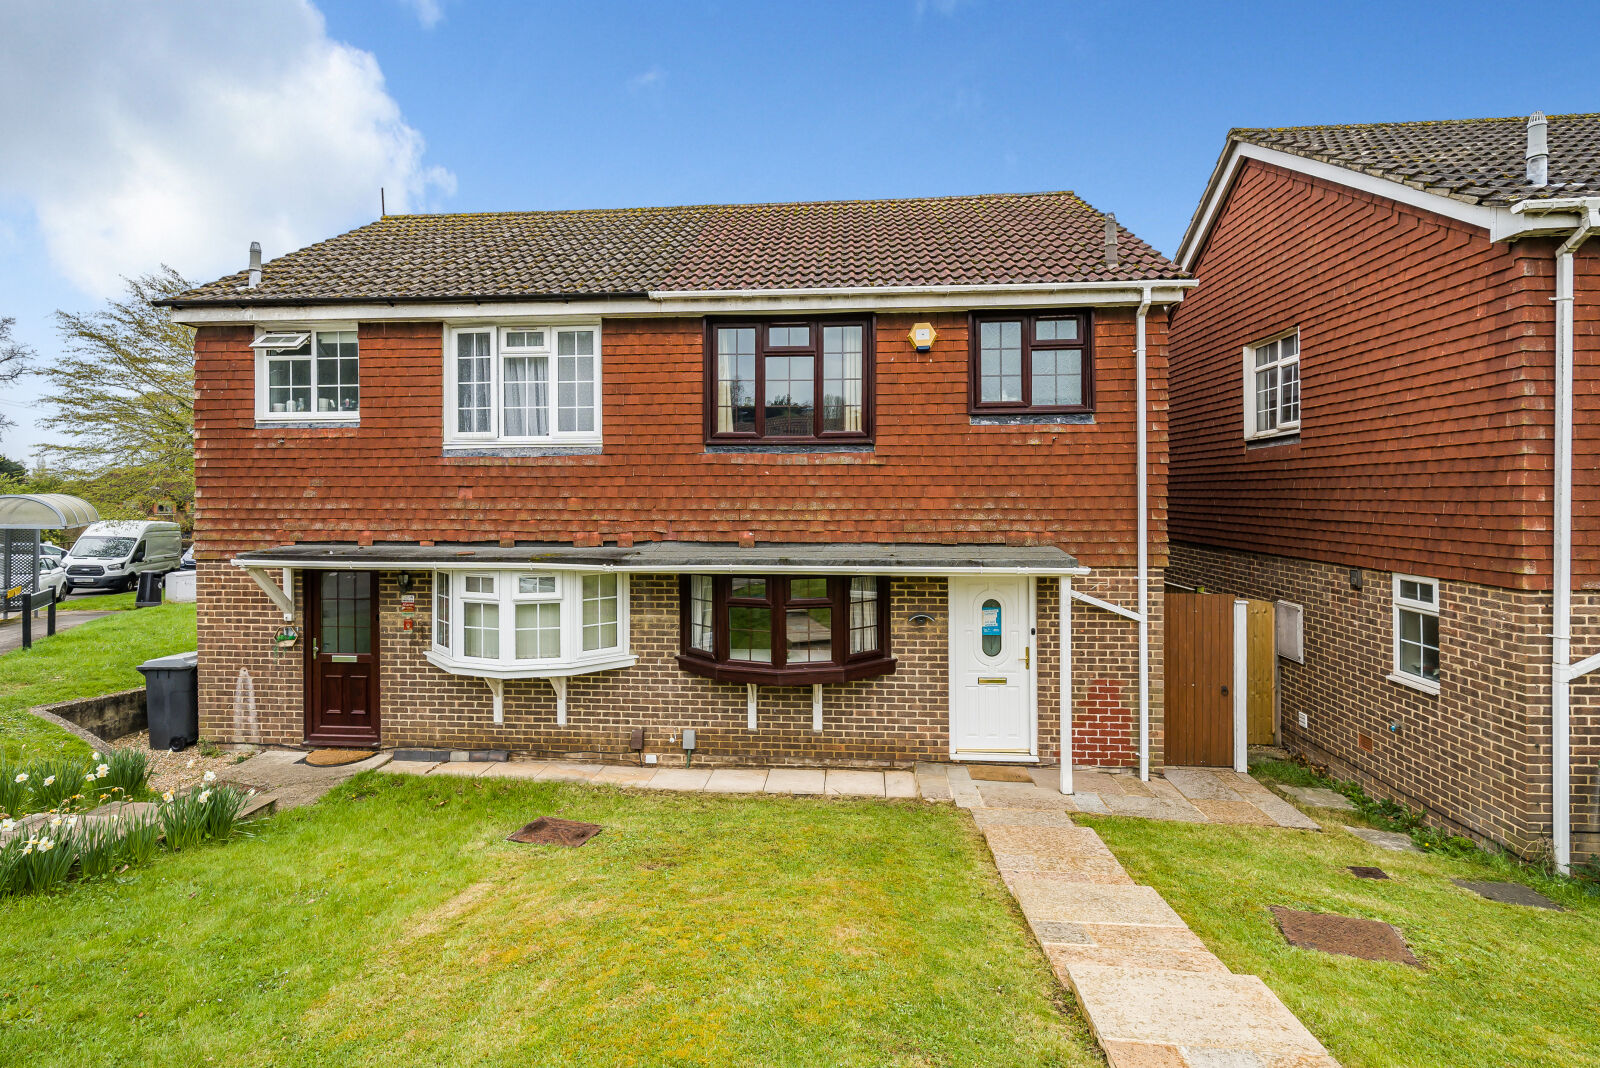 3 bedroom semi detached house for sale Yew Tree Rise, Calcot, RG31, main image